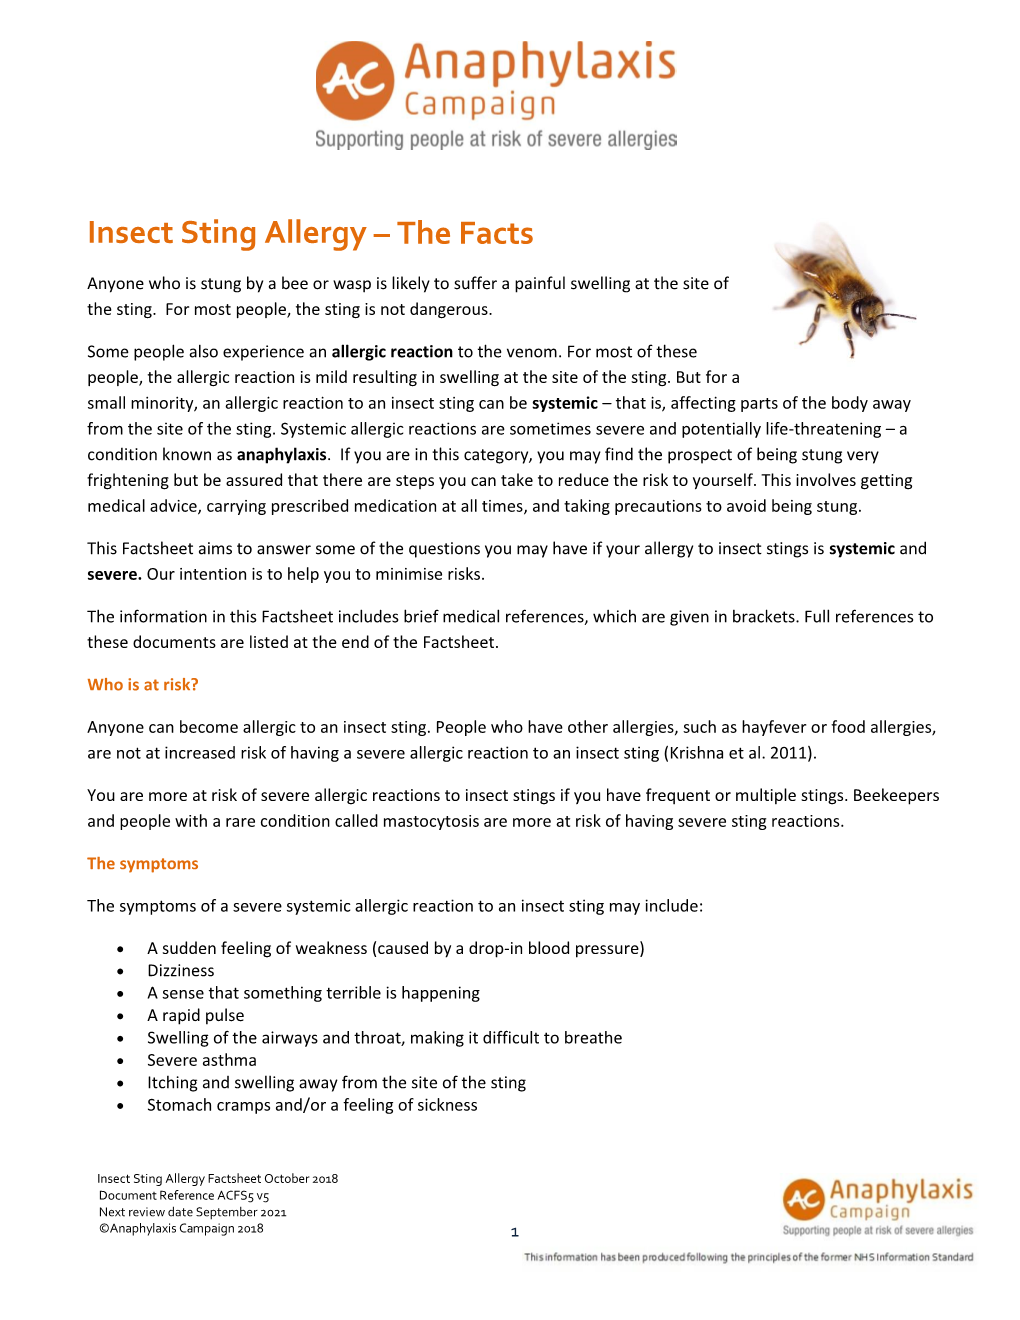 Insect Stings Is Systemic and Severe